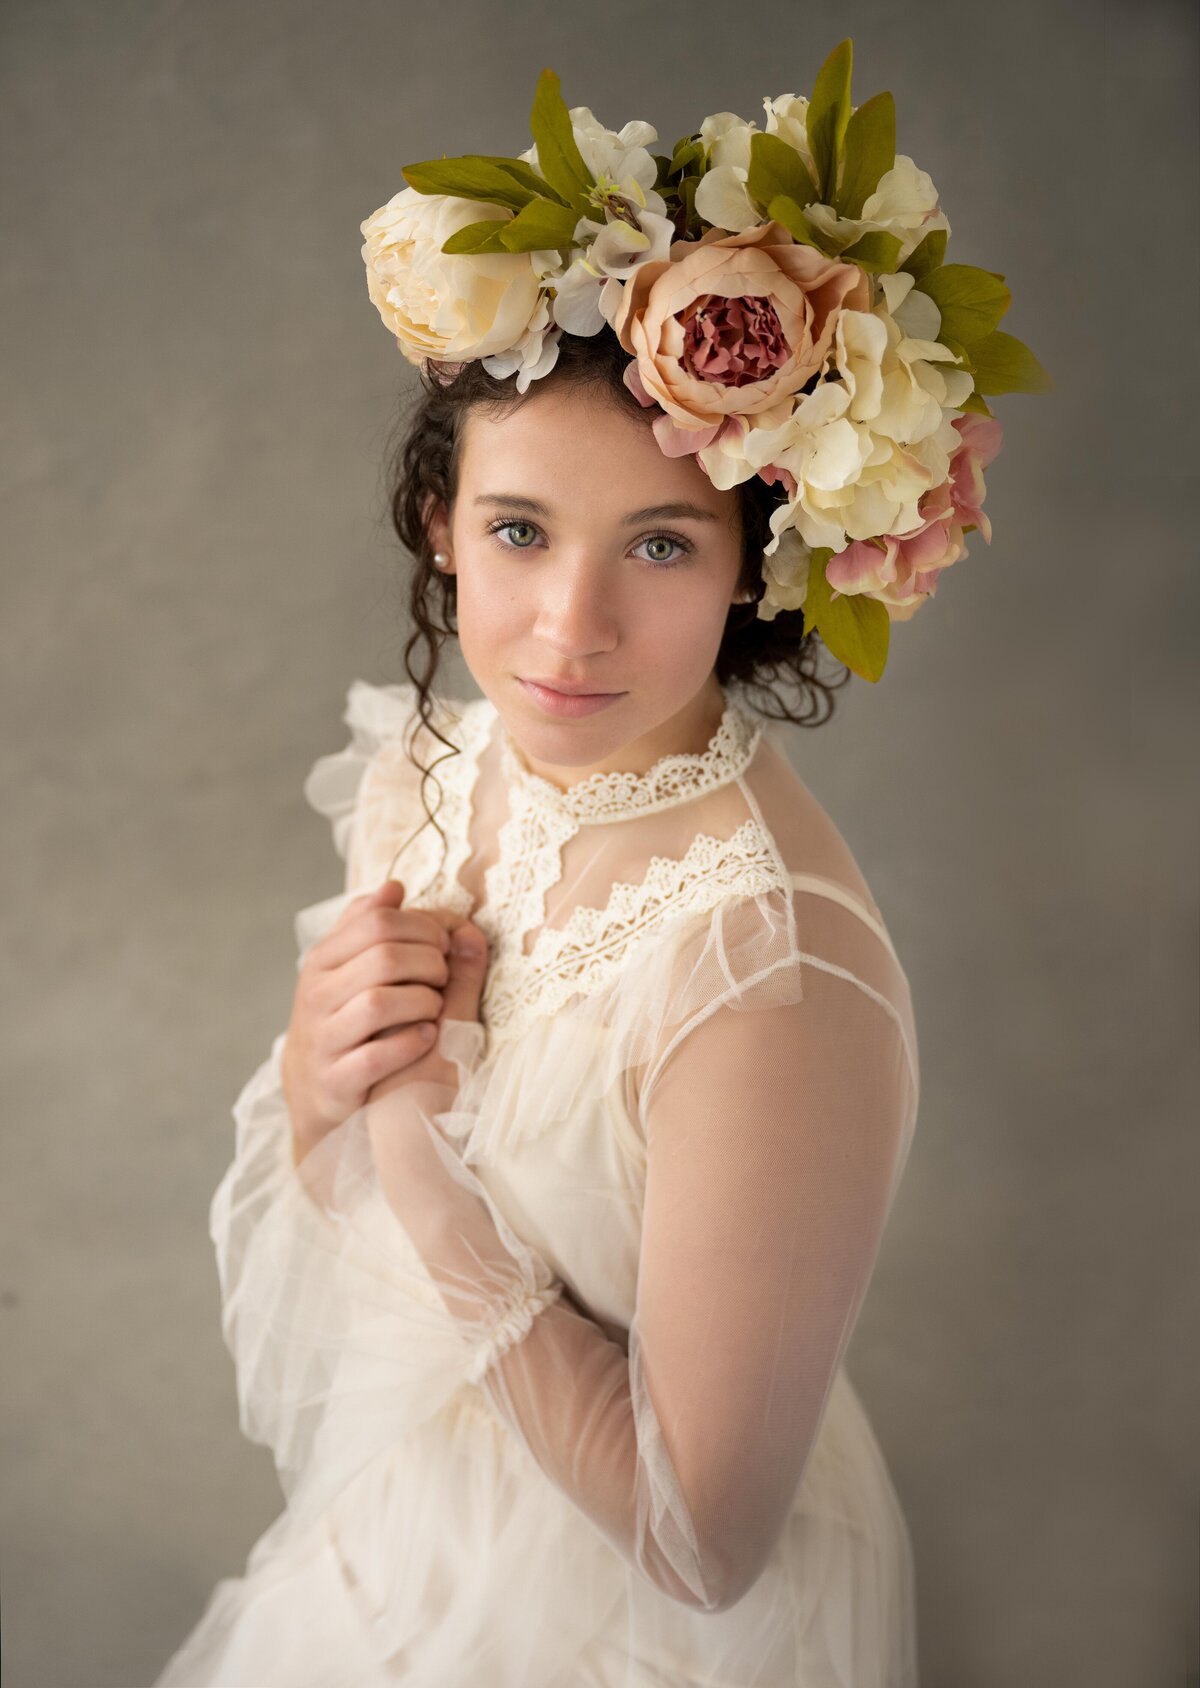 Young girl posing with flower head piece